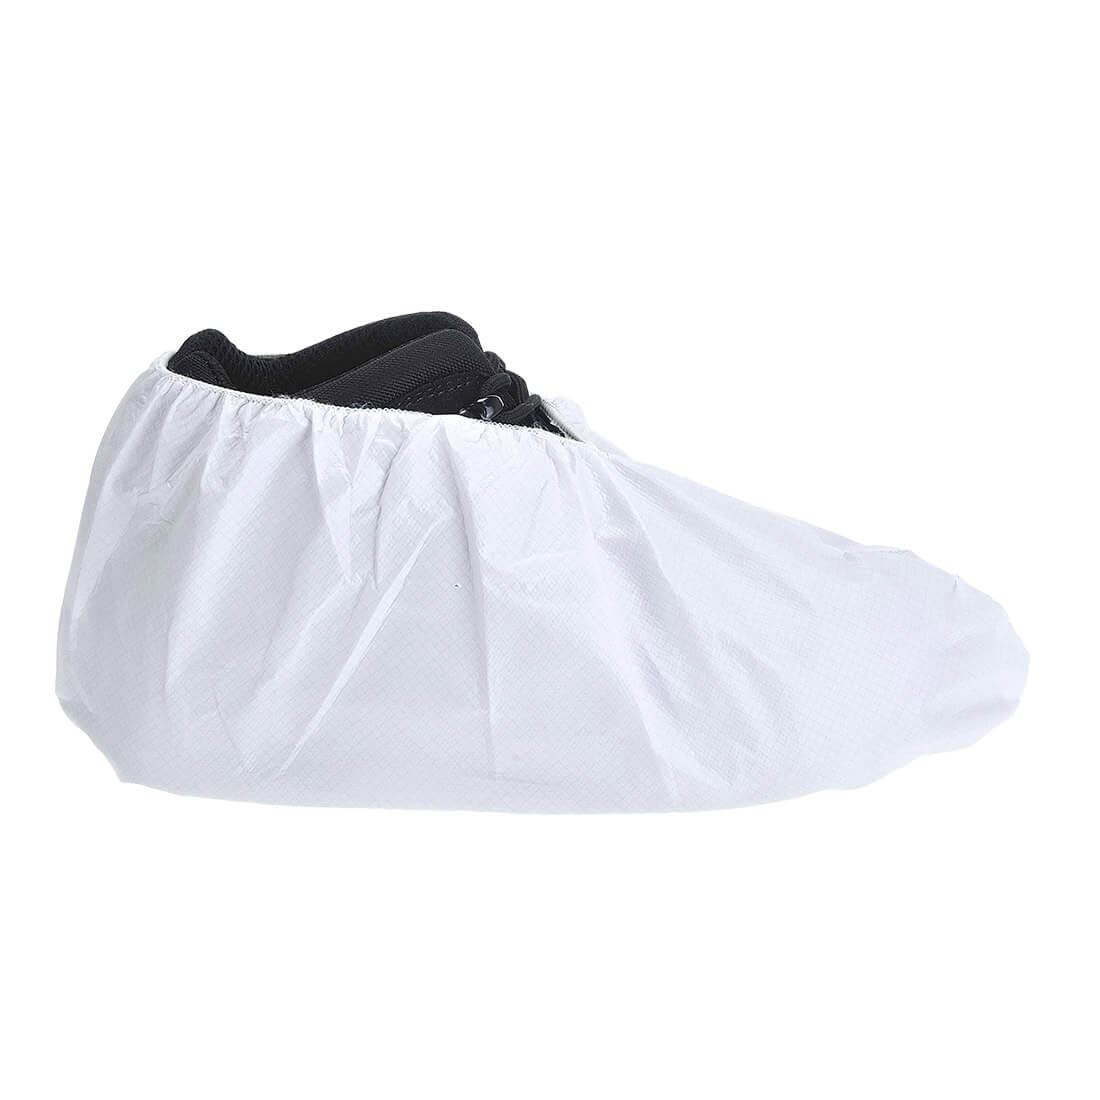 BizTex® Microporous Shoe Cover Type 6PB - Personal protection